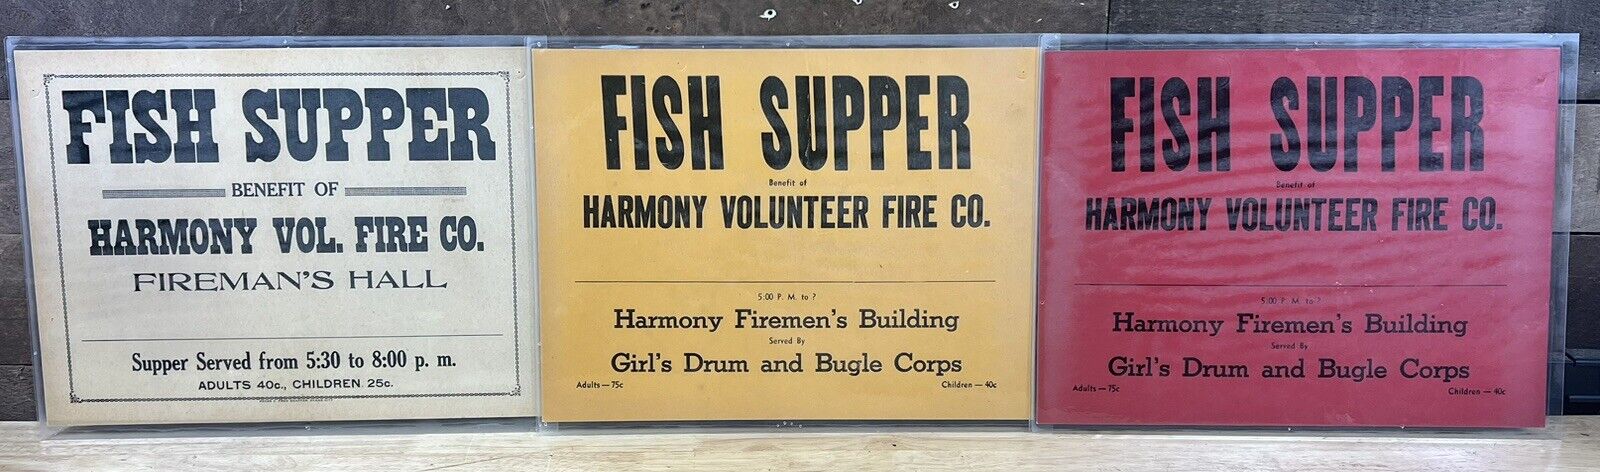 Lot Of 3 Vintage Harmony Volunteer Fire Co. “Fish Supper” Signs 